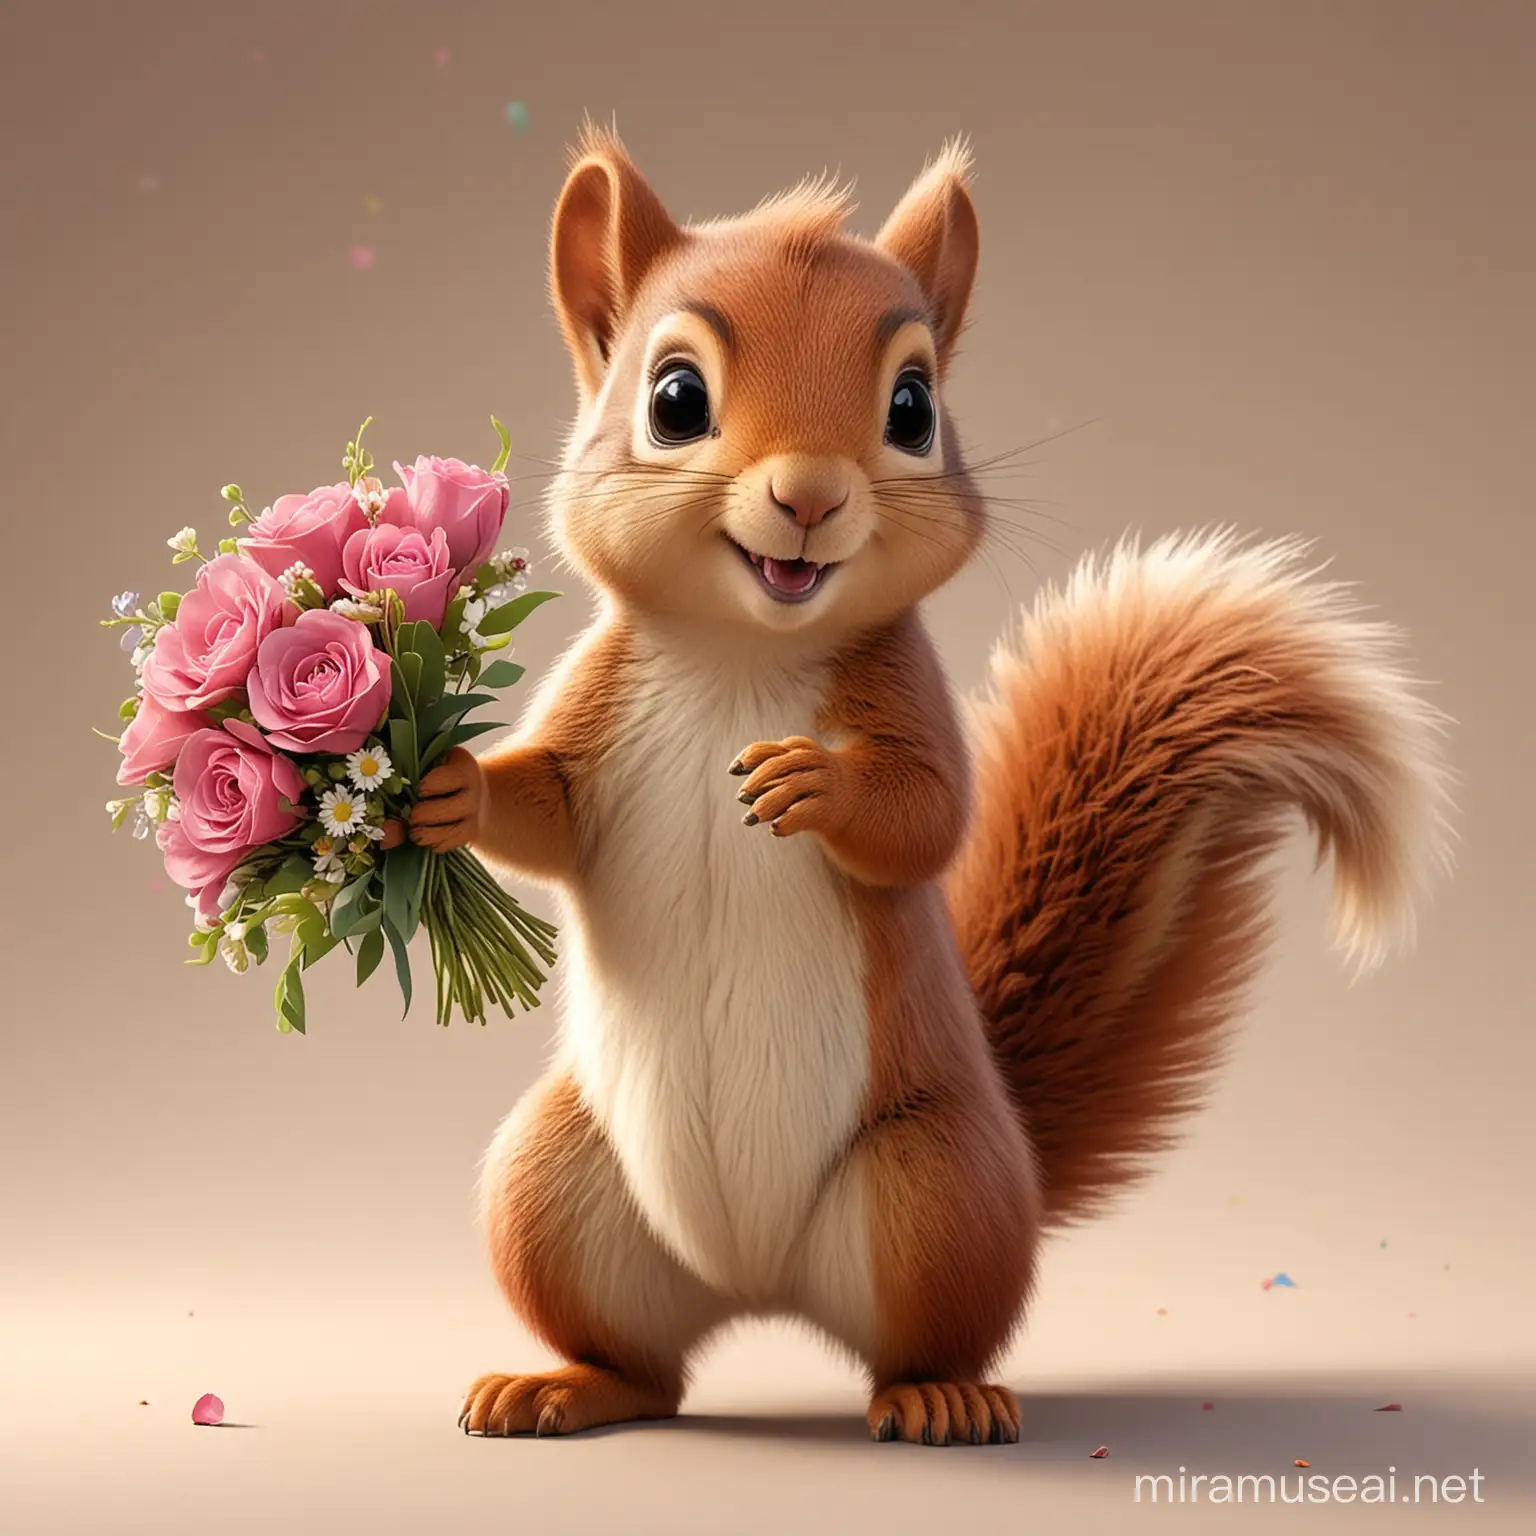 squirrel cub with bouquet of flowers, birthday, in Disney Pixar style